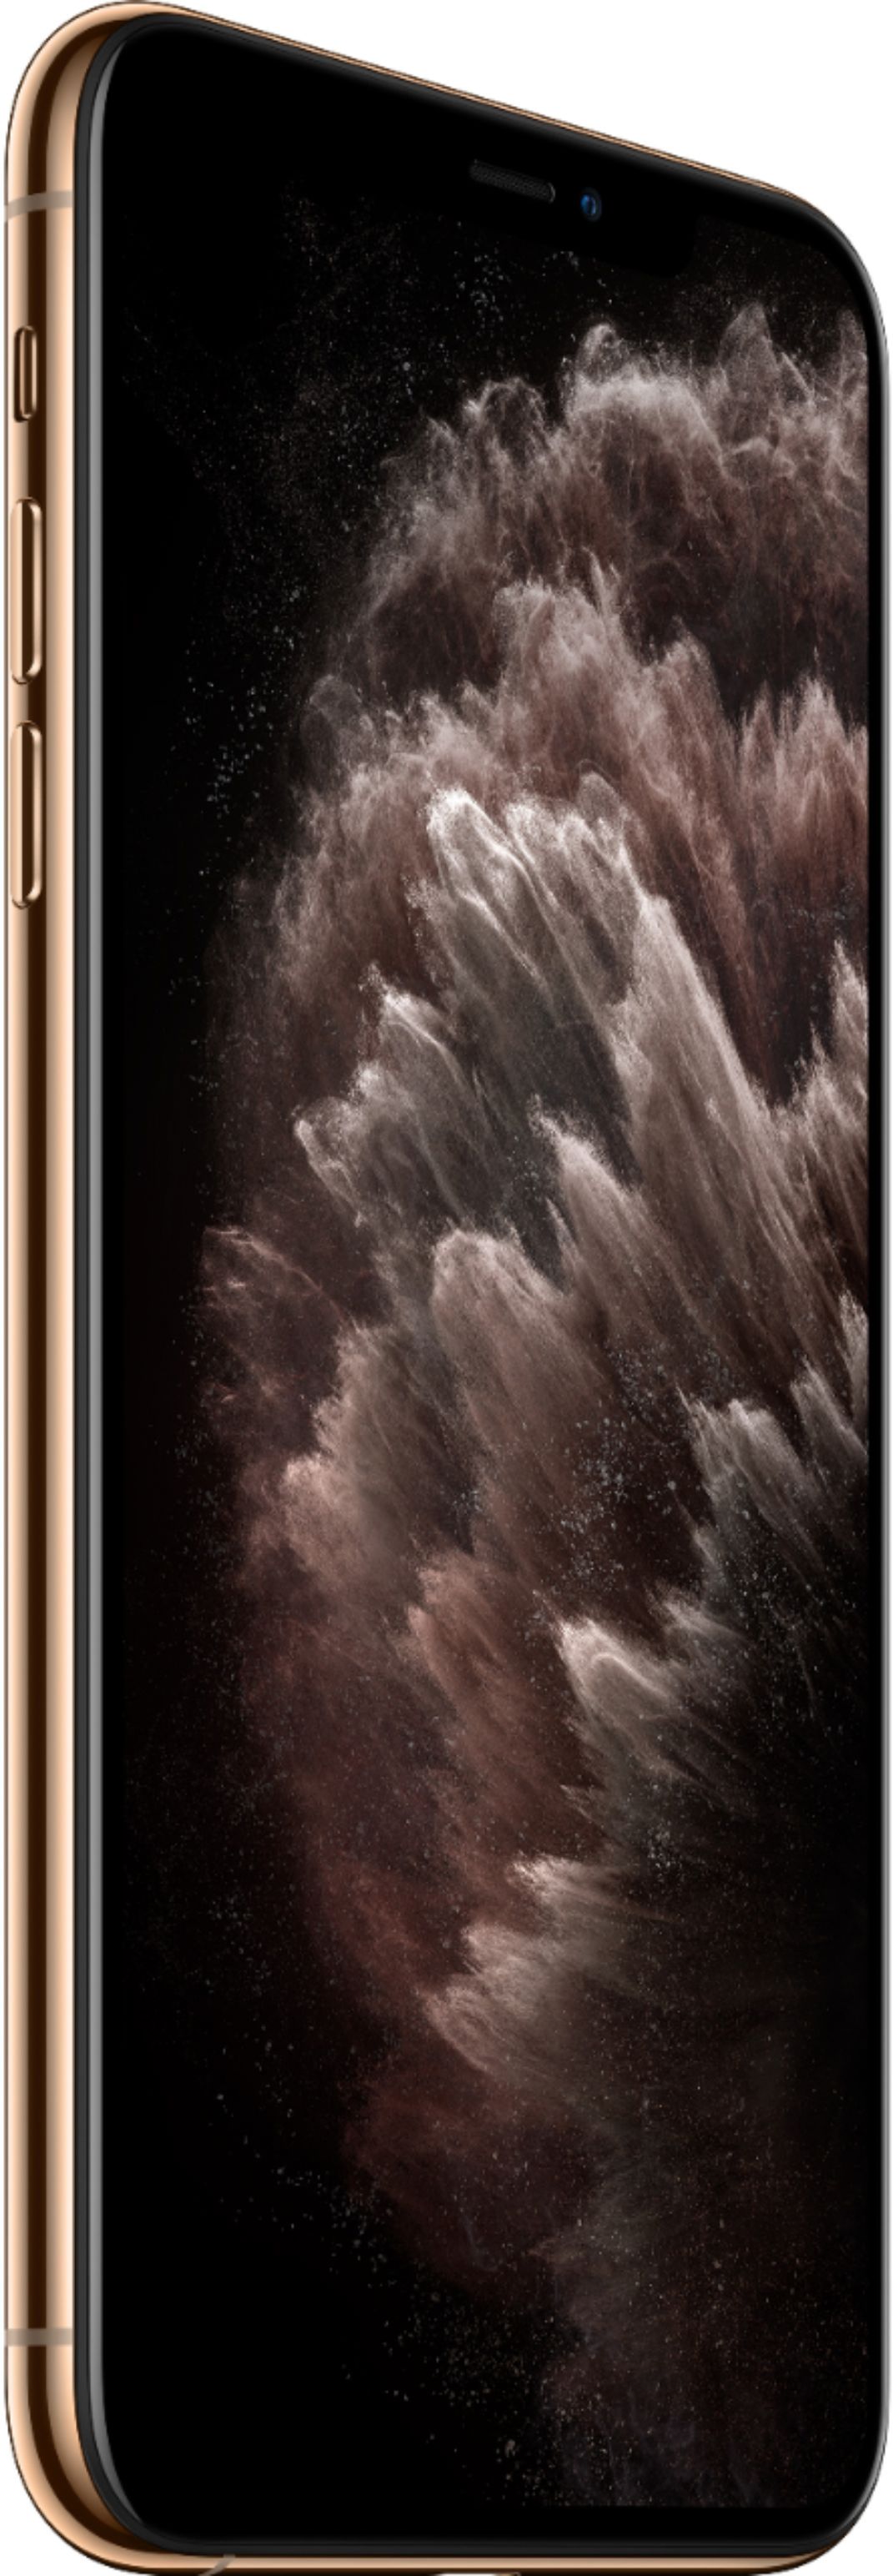 Apple Iphone 11 Pro Max 512gb Gold At T Mwha2ll A Best Buy